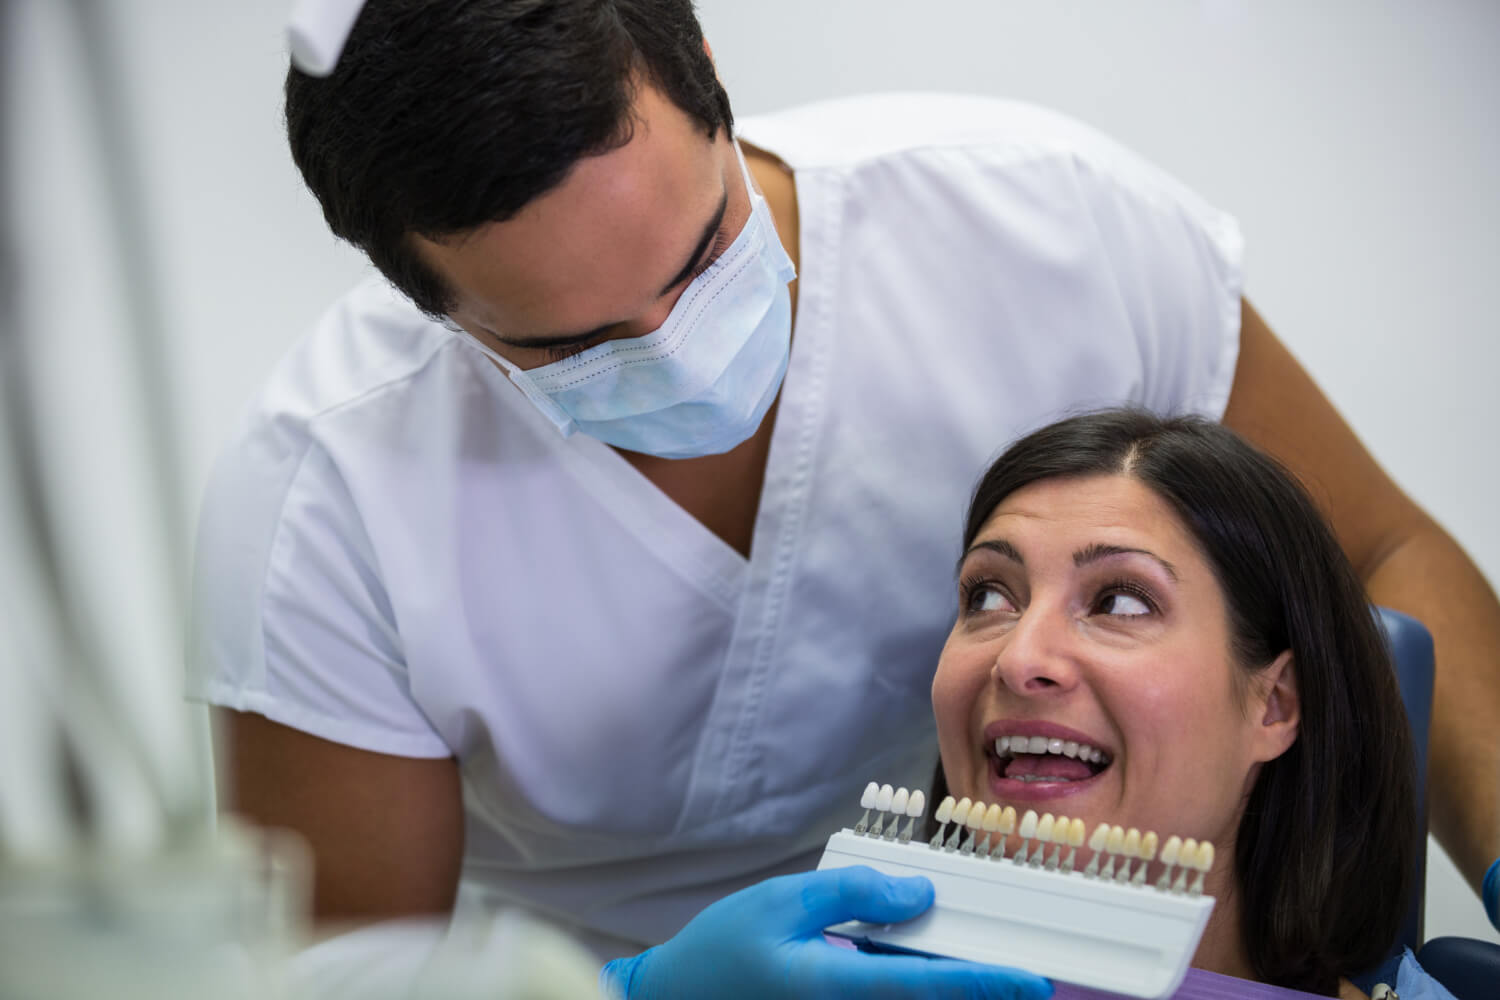 The main benefits of using dental implants